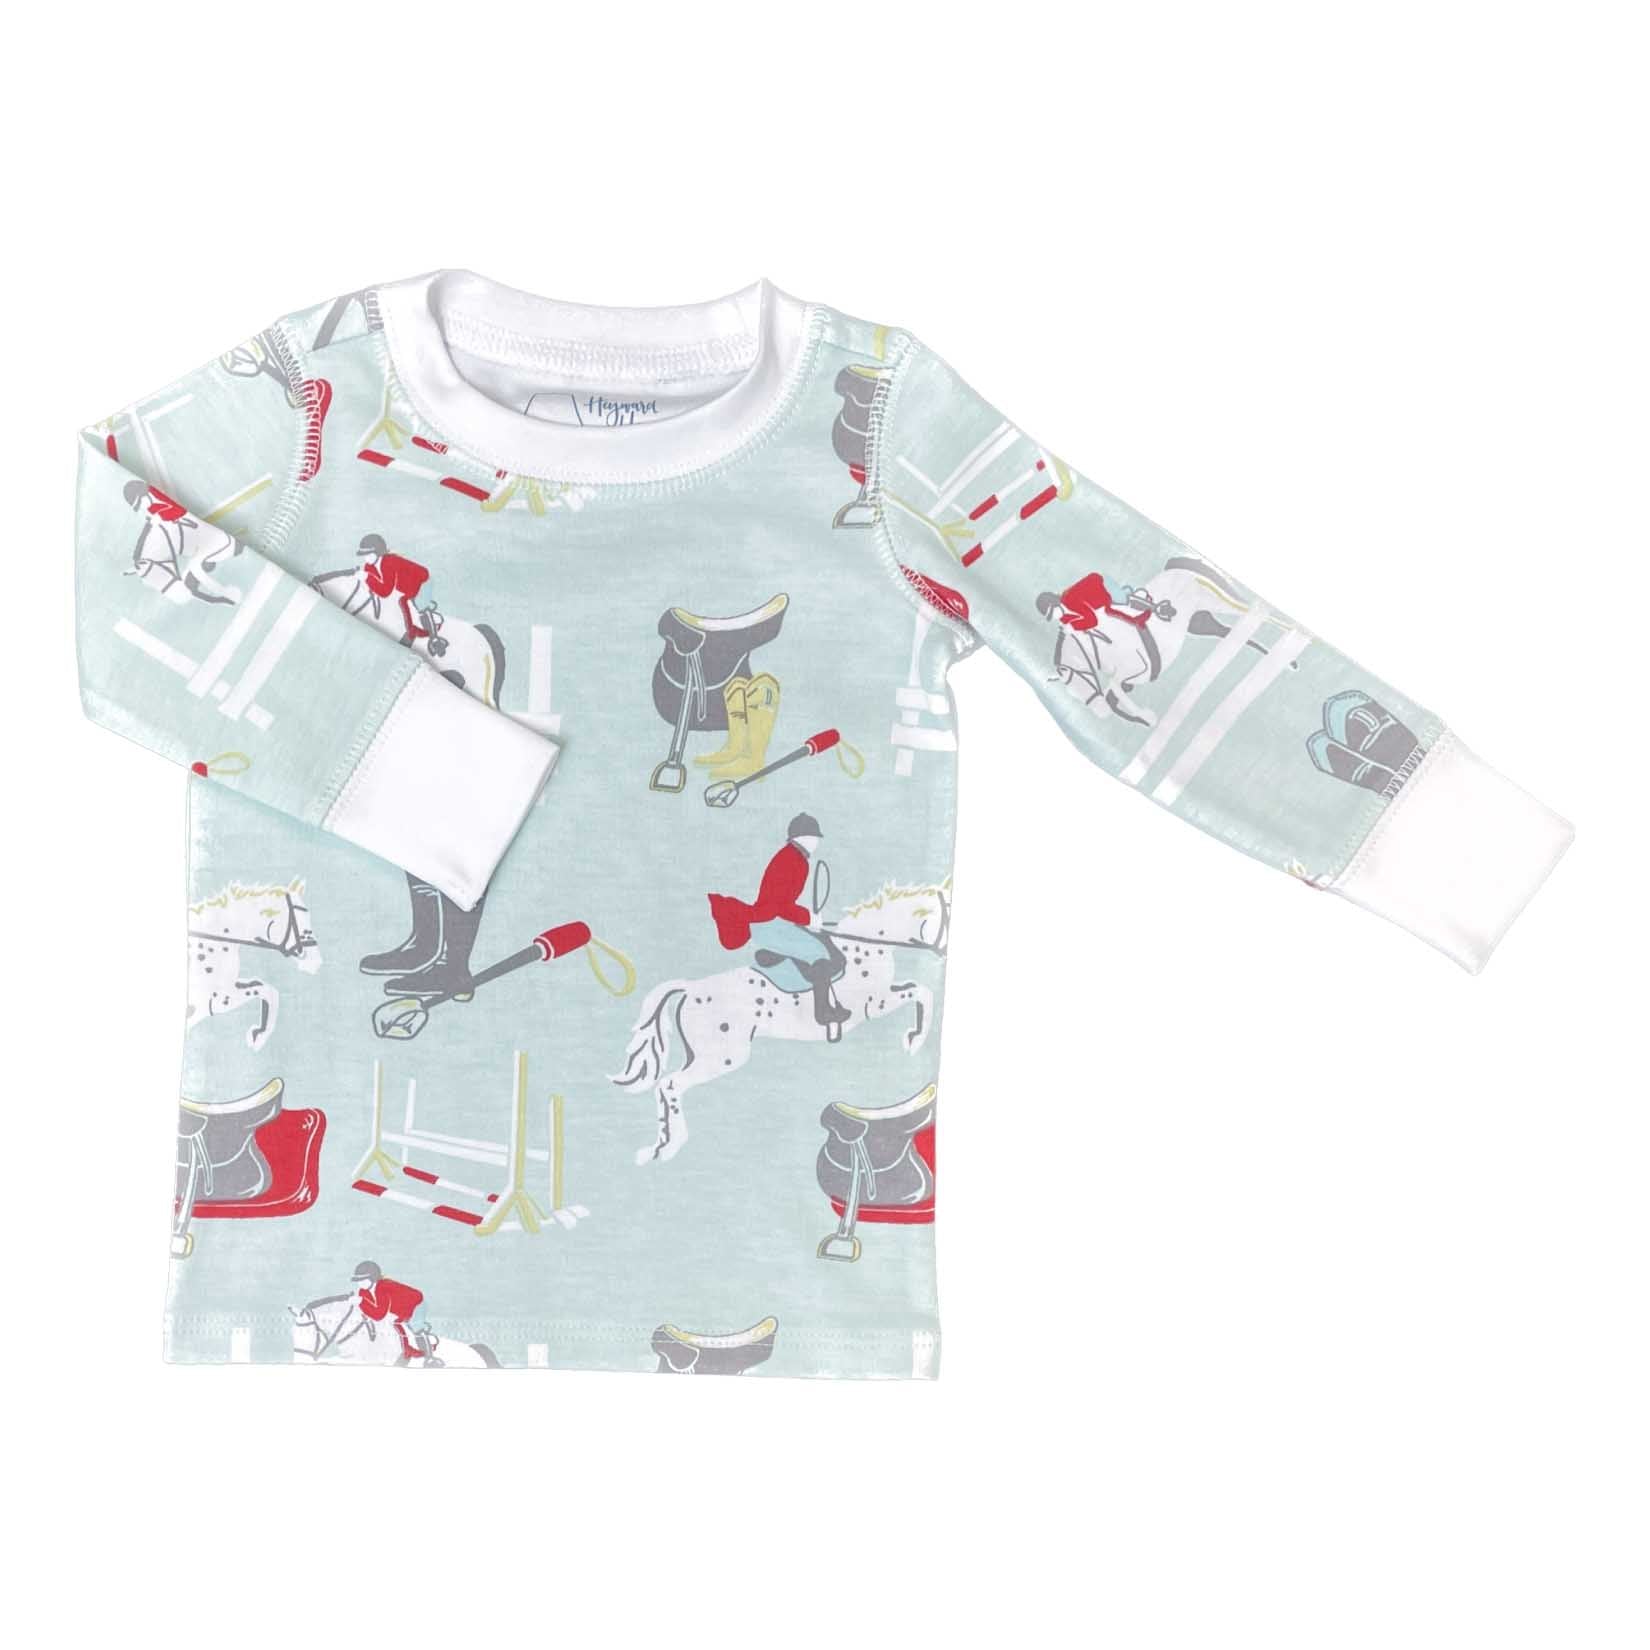 2 piece pajama set with equestrian horse print by Heyward House shirt view